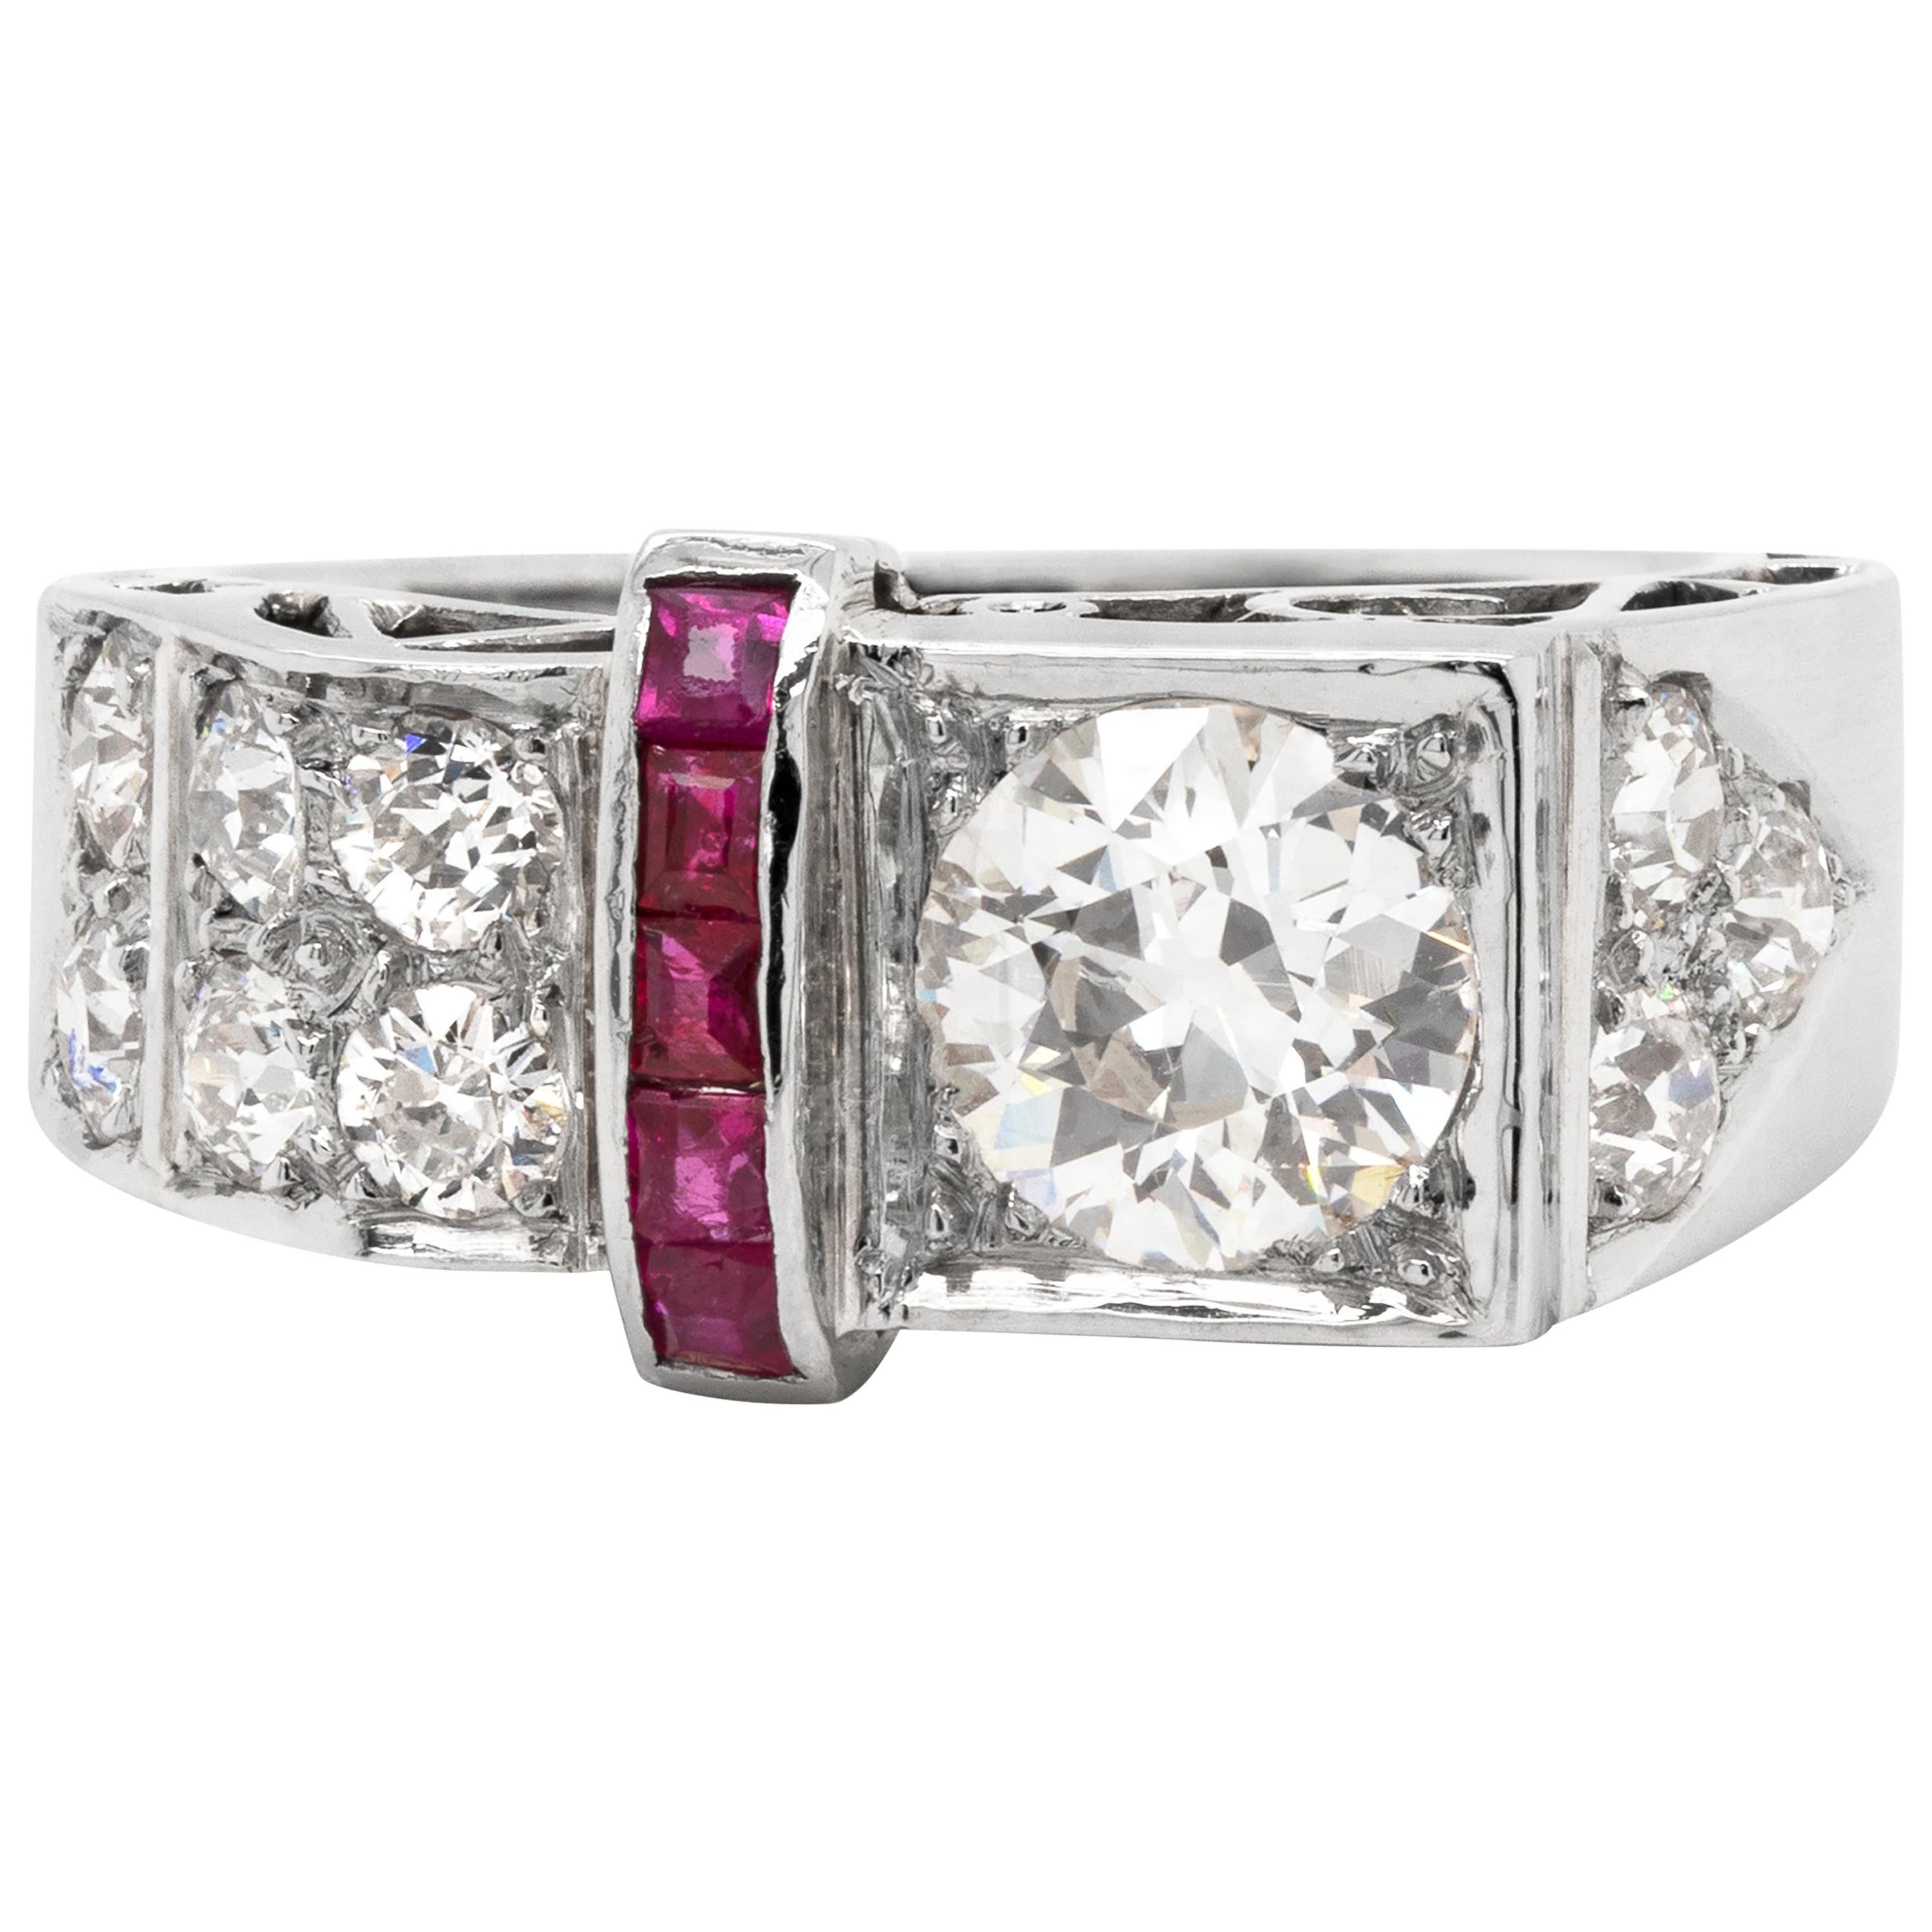 0.83 Carat Old European Cut Diamond and Ruby Platinum Ring, circa 1950s For Sale